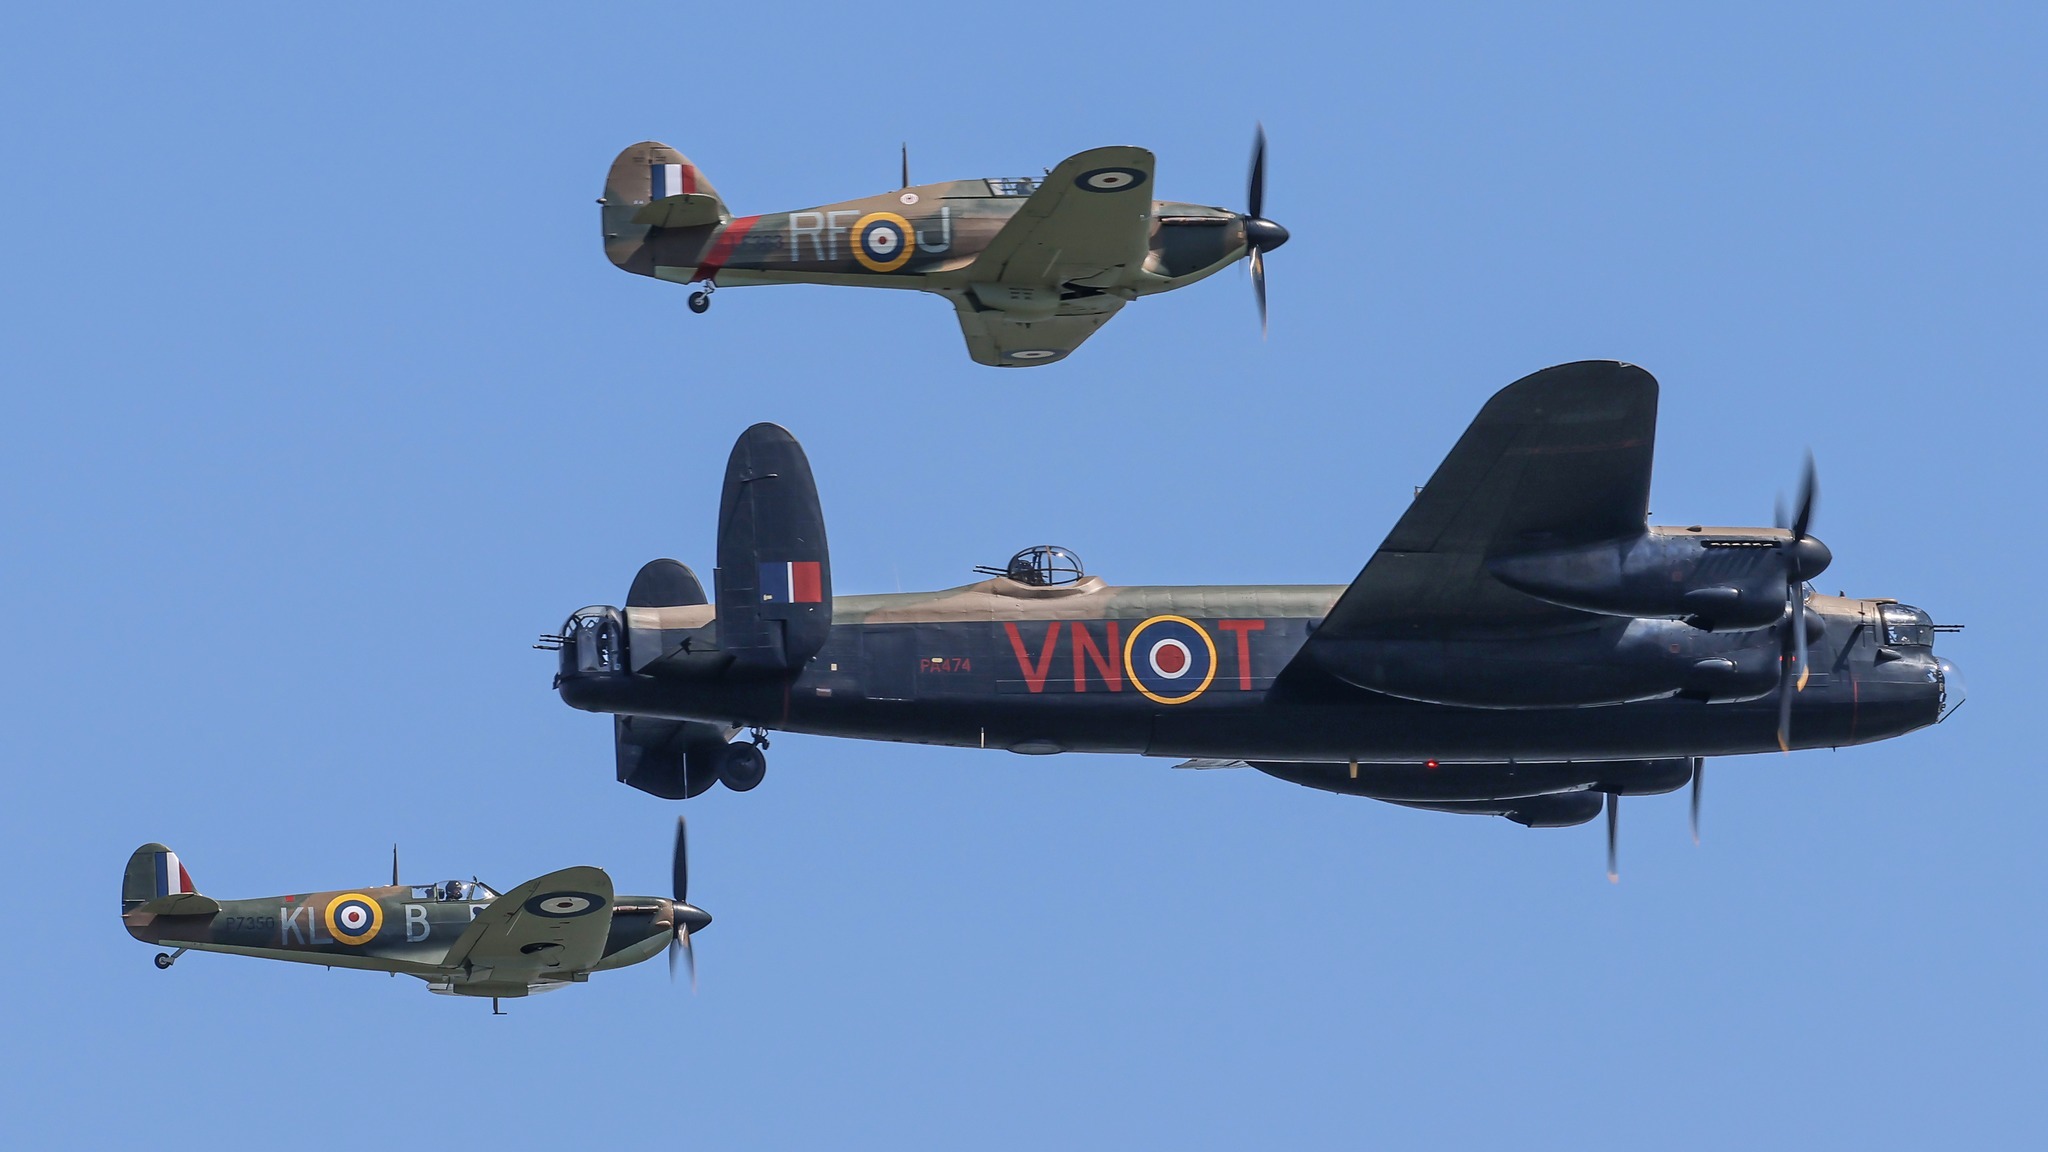 The Battle of Britain memorial flight at the Battle of the Atlantic anniversary by Ray Yu